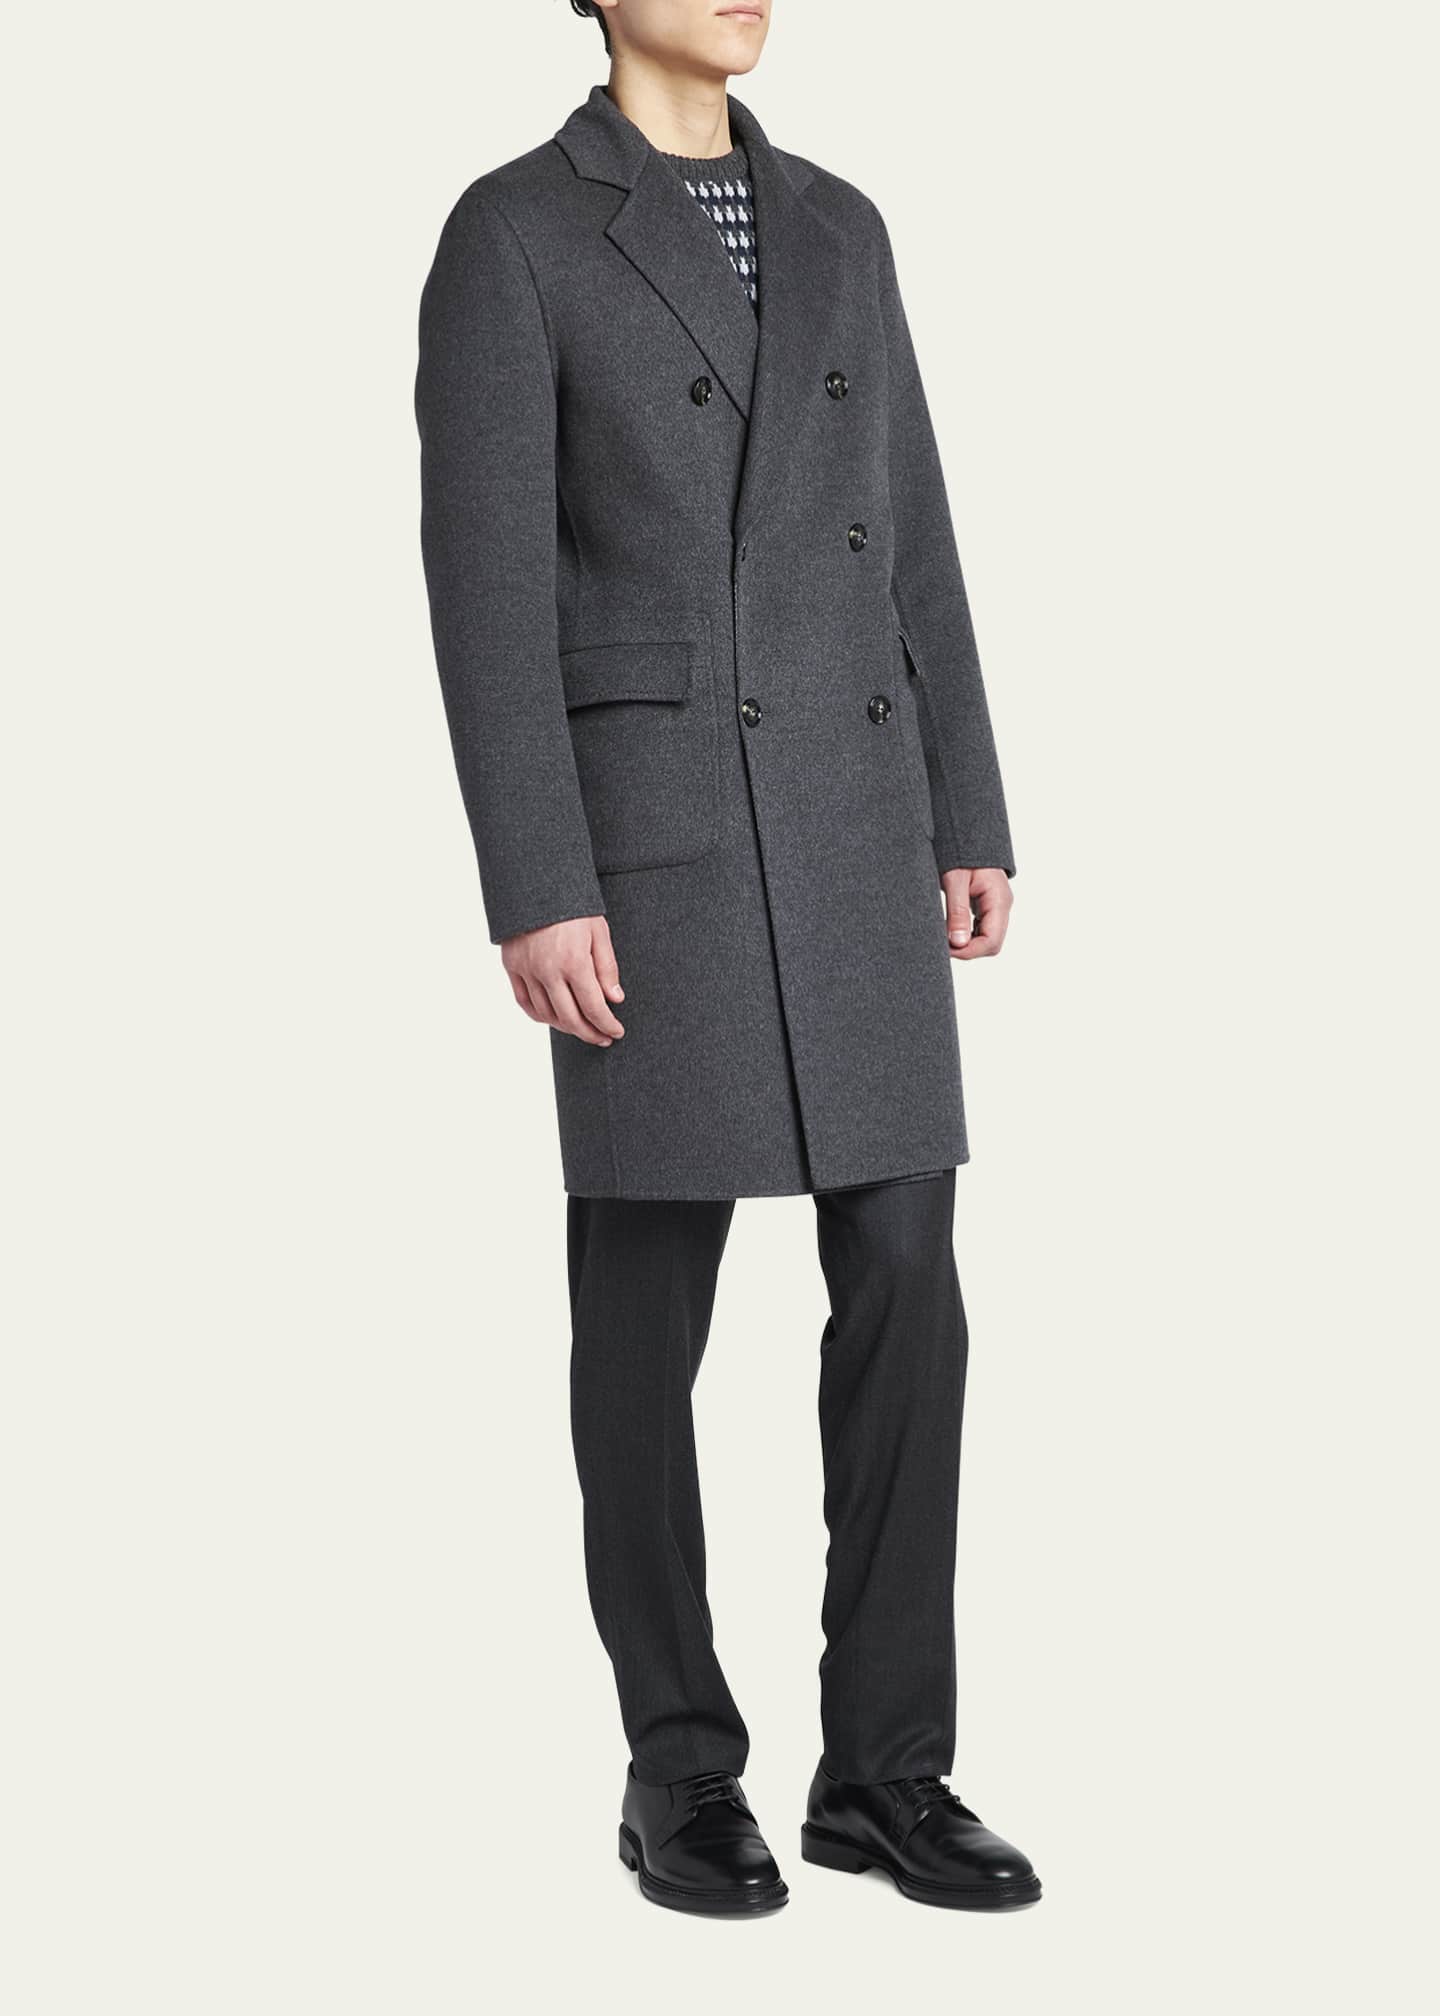 Kiton Men's Cashmere-Wool Double-Breasted Overcoat - Bergdorf Goodman